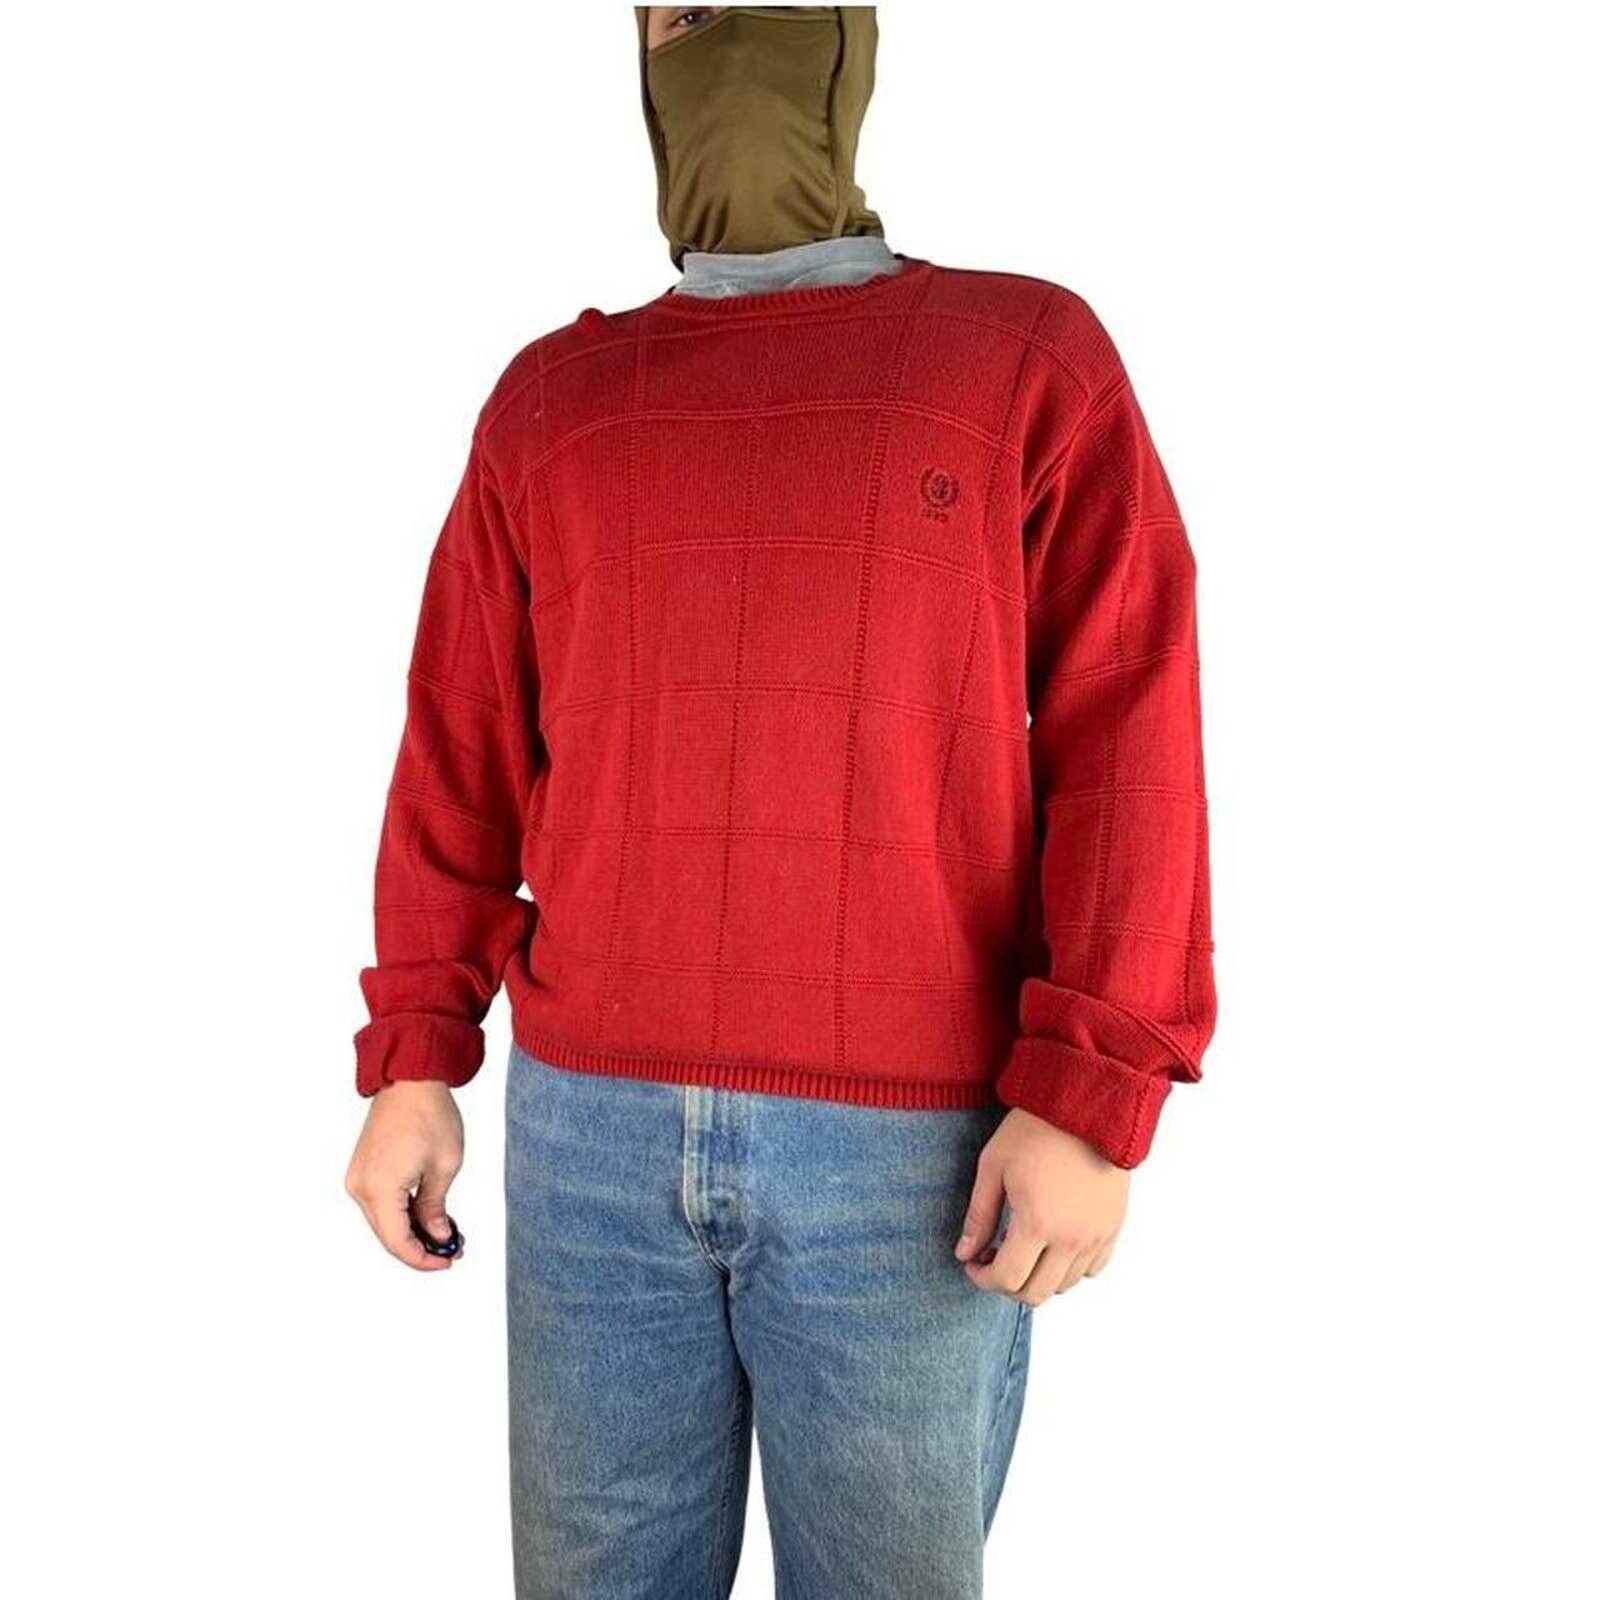 Chaps Vintage 90s Chaps Baggy Red Sweater Size US L / EU 52-54 / 3 - 1 Preview